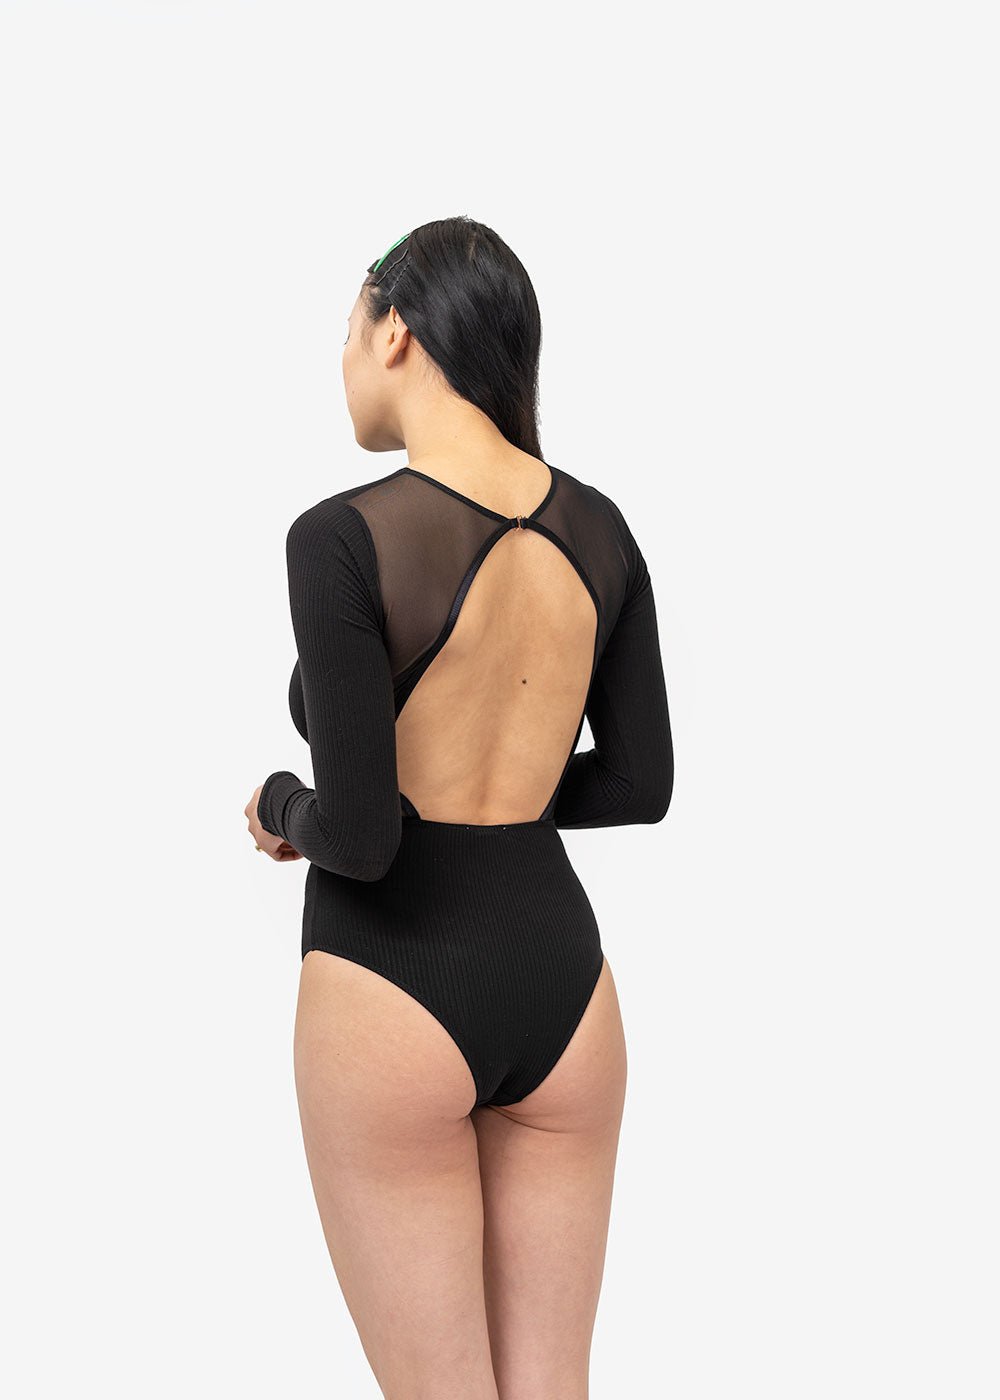 Angie Bauer Mulberry Bodysuit — Shop sustainable fashion and slow fashion at New Classics Studios